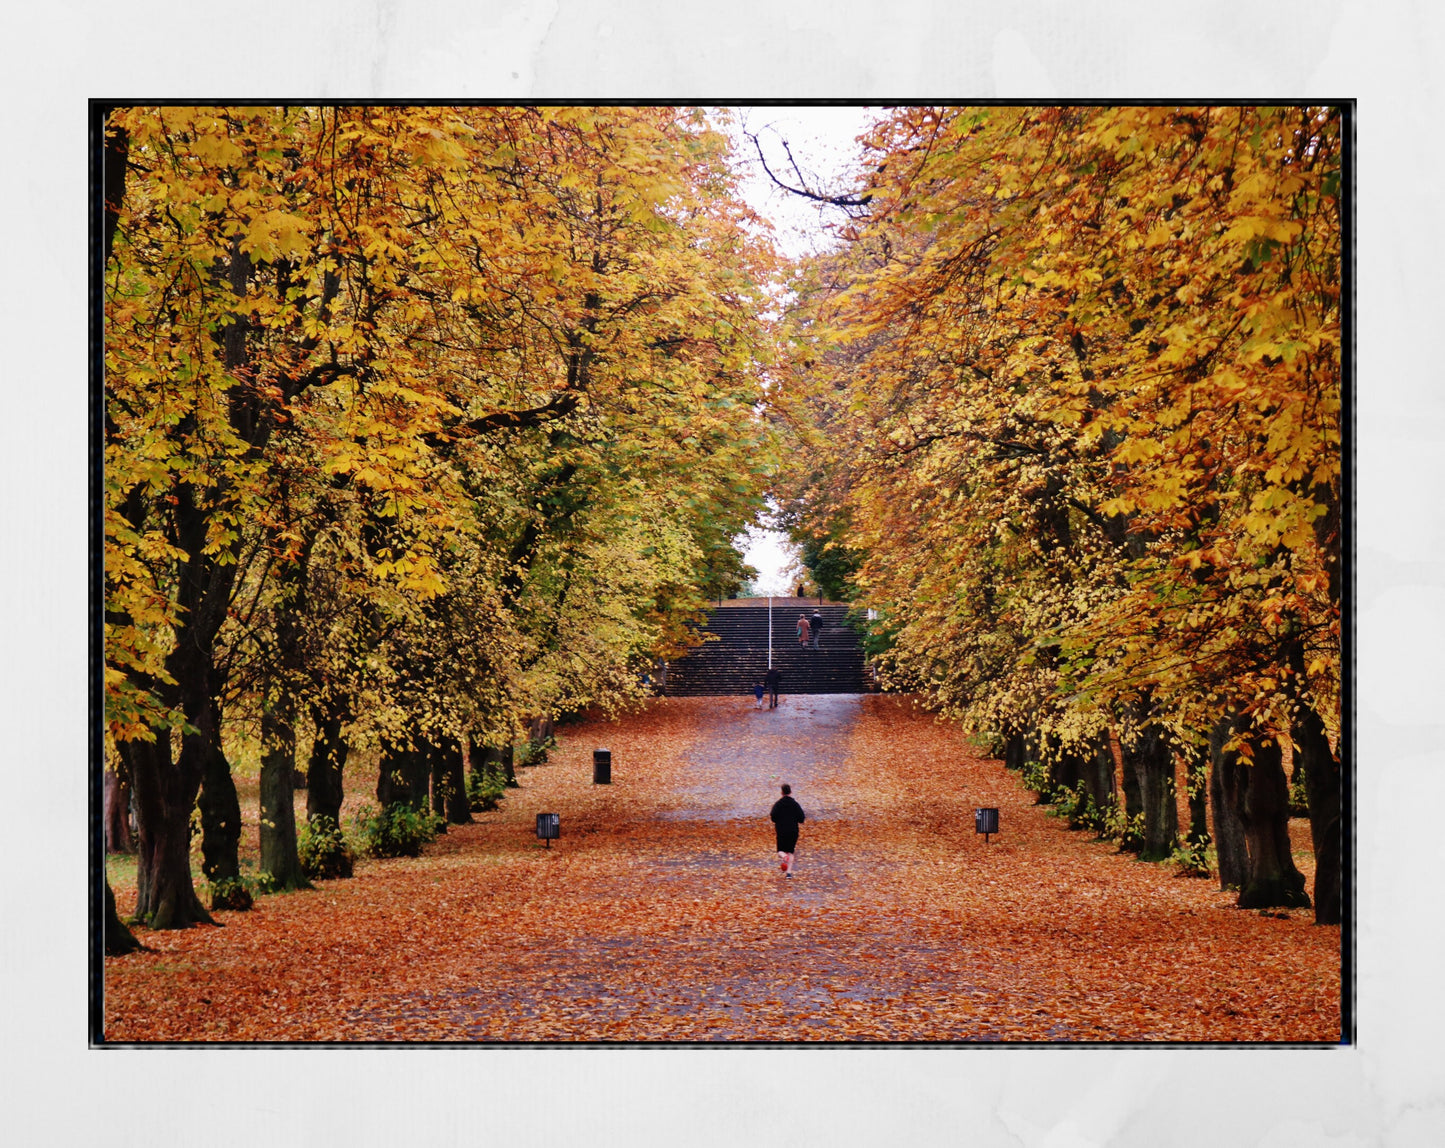 Glasgow Queen's Park Autumn Fall Foliage Photography Print Poster Wall Art